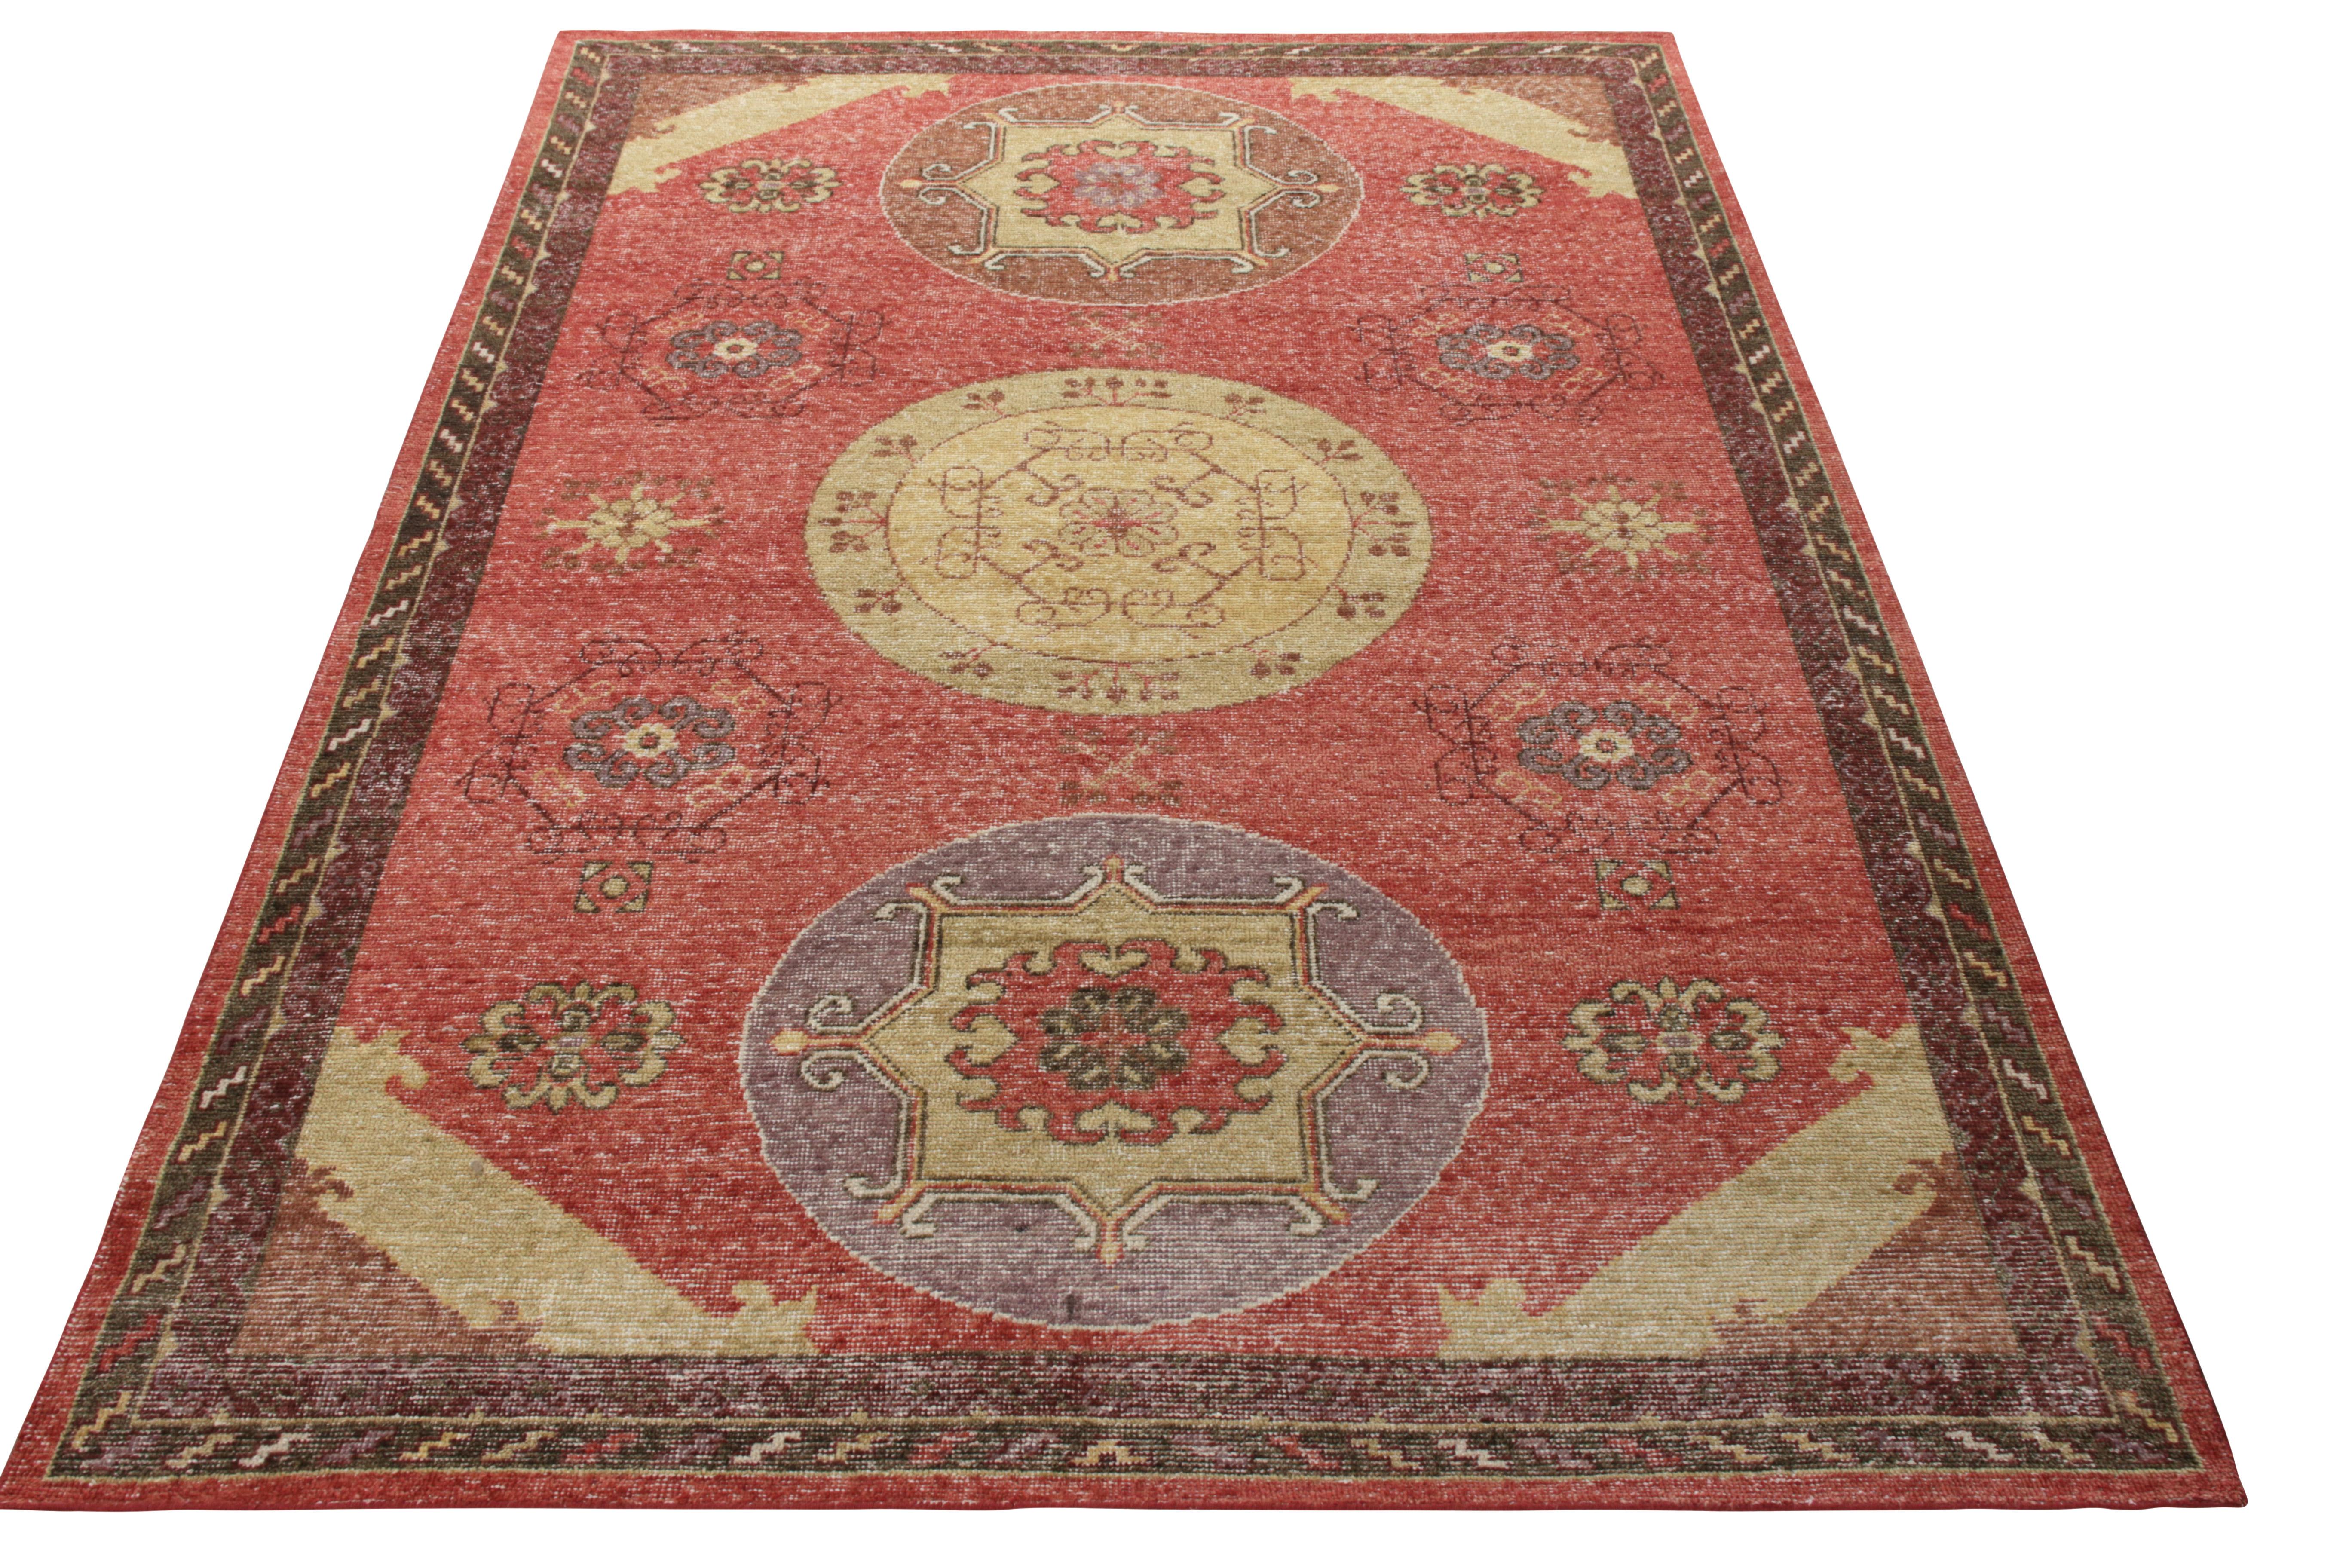 A 6x9 distressed style Khotan-inspired rug from Rug & Kilim’s Homage Collection. Carrying an enticing medallion pattern, this hand-knotted wool rug revels in a rich and bright color palette of beige-brown, off-yellow and red that witnesses elements